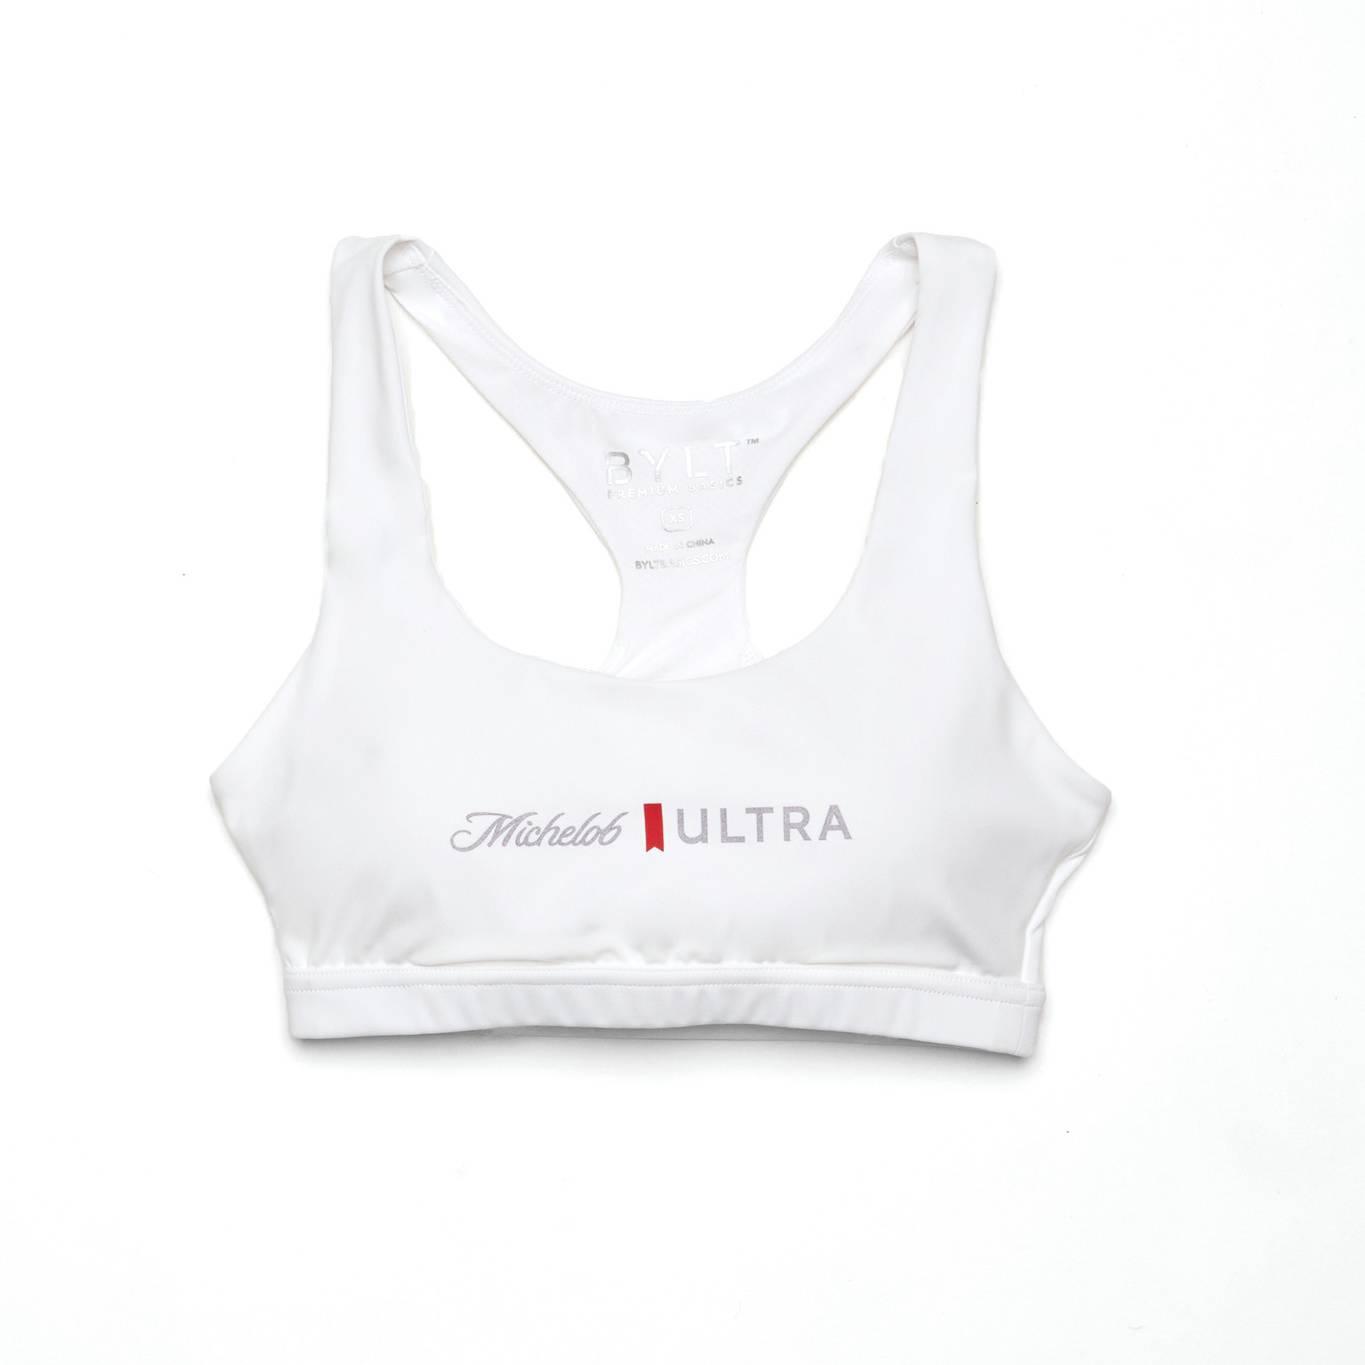 product shot of front of sports bra